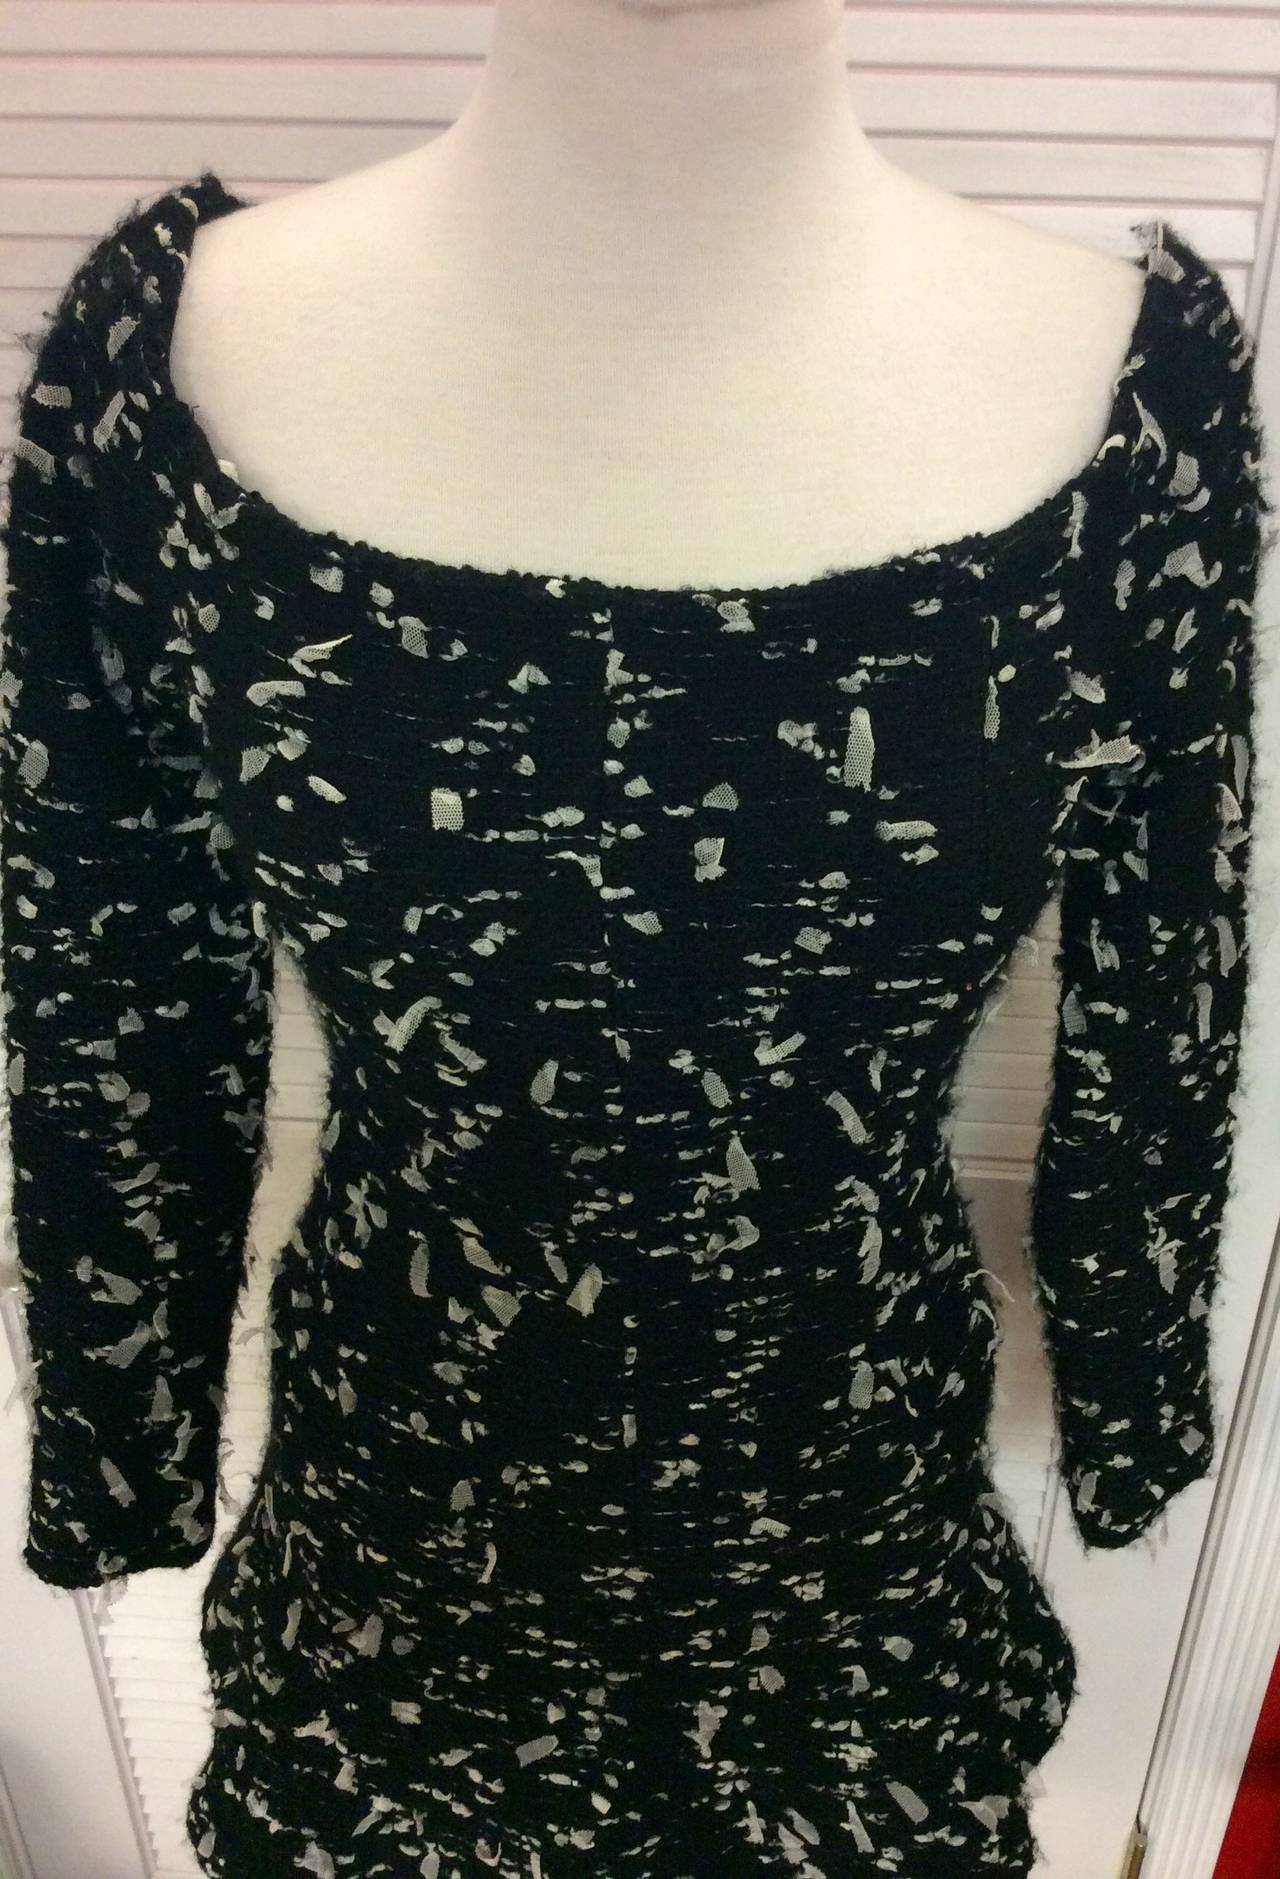 This is a Chanel 02A  2002 tulle  confetti tweed semi off shoulders long sleeve mini dress
Wool blend fully lined
Hidden back zipper
A Line
Fabric composition: 72% wool, a percent nylon, a percent acrylic, 7% rayon
Lining 90% silk temper sent